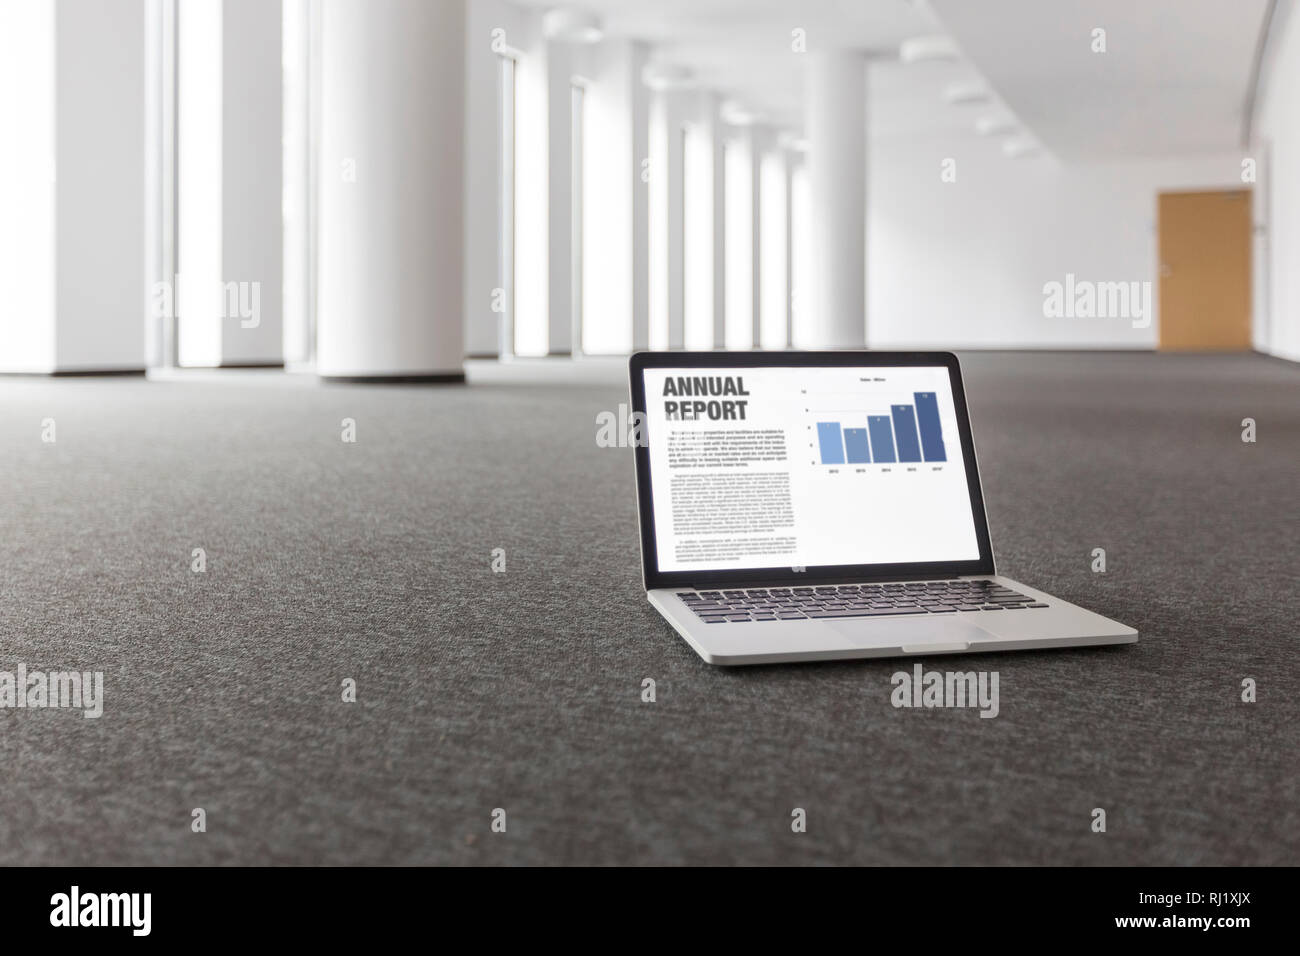 Annual report graph on laptop at new empty office Stock Photo